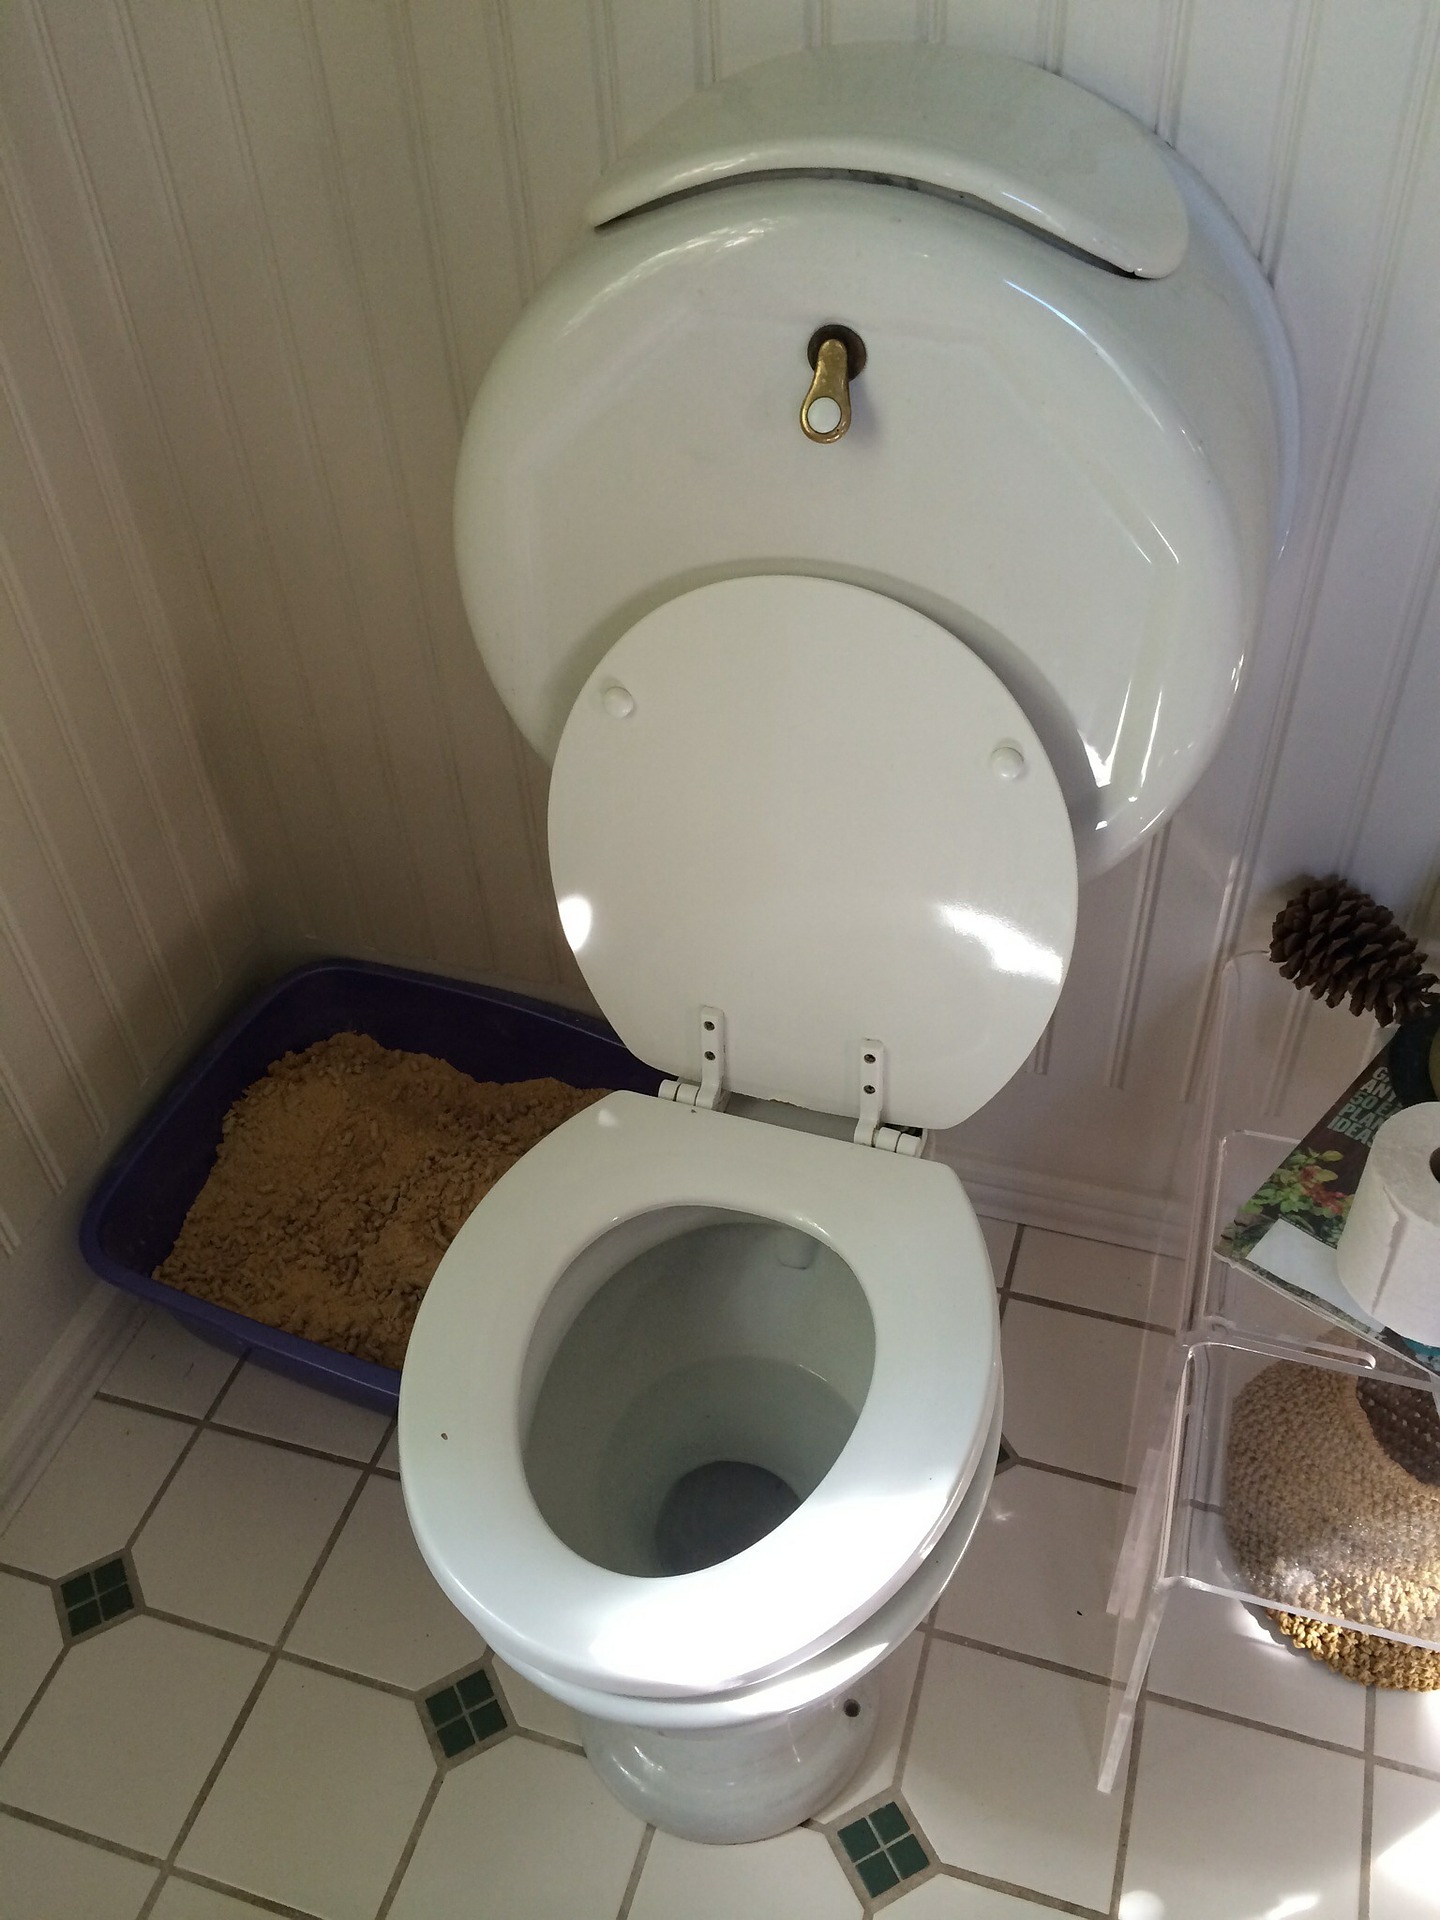 What should you do to avoid toilet problems?